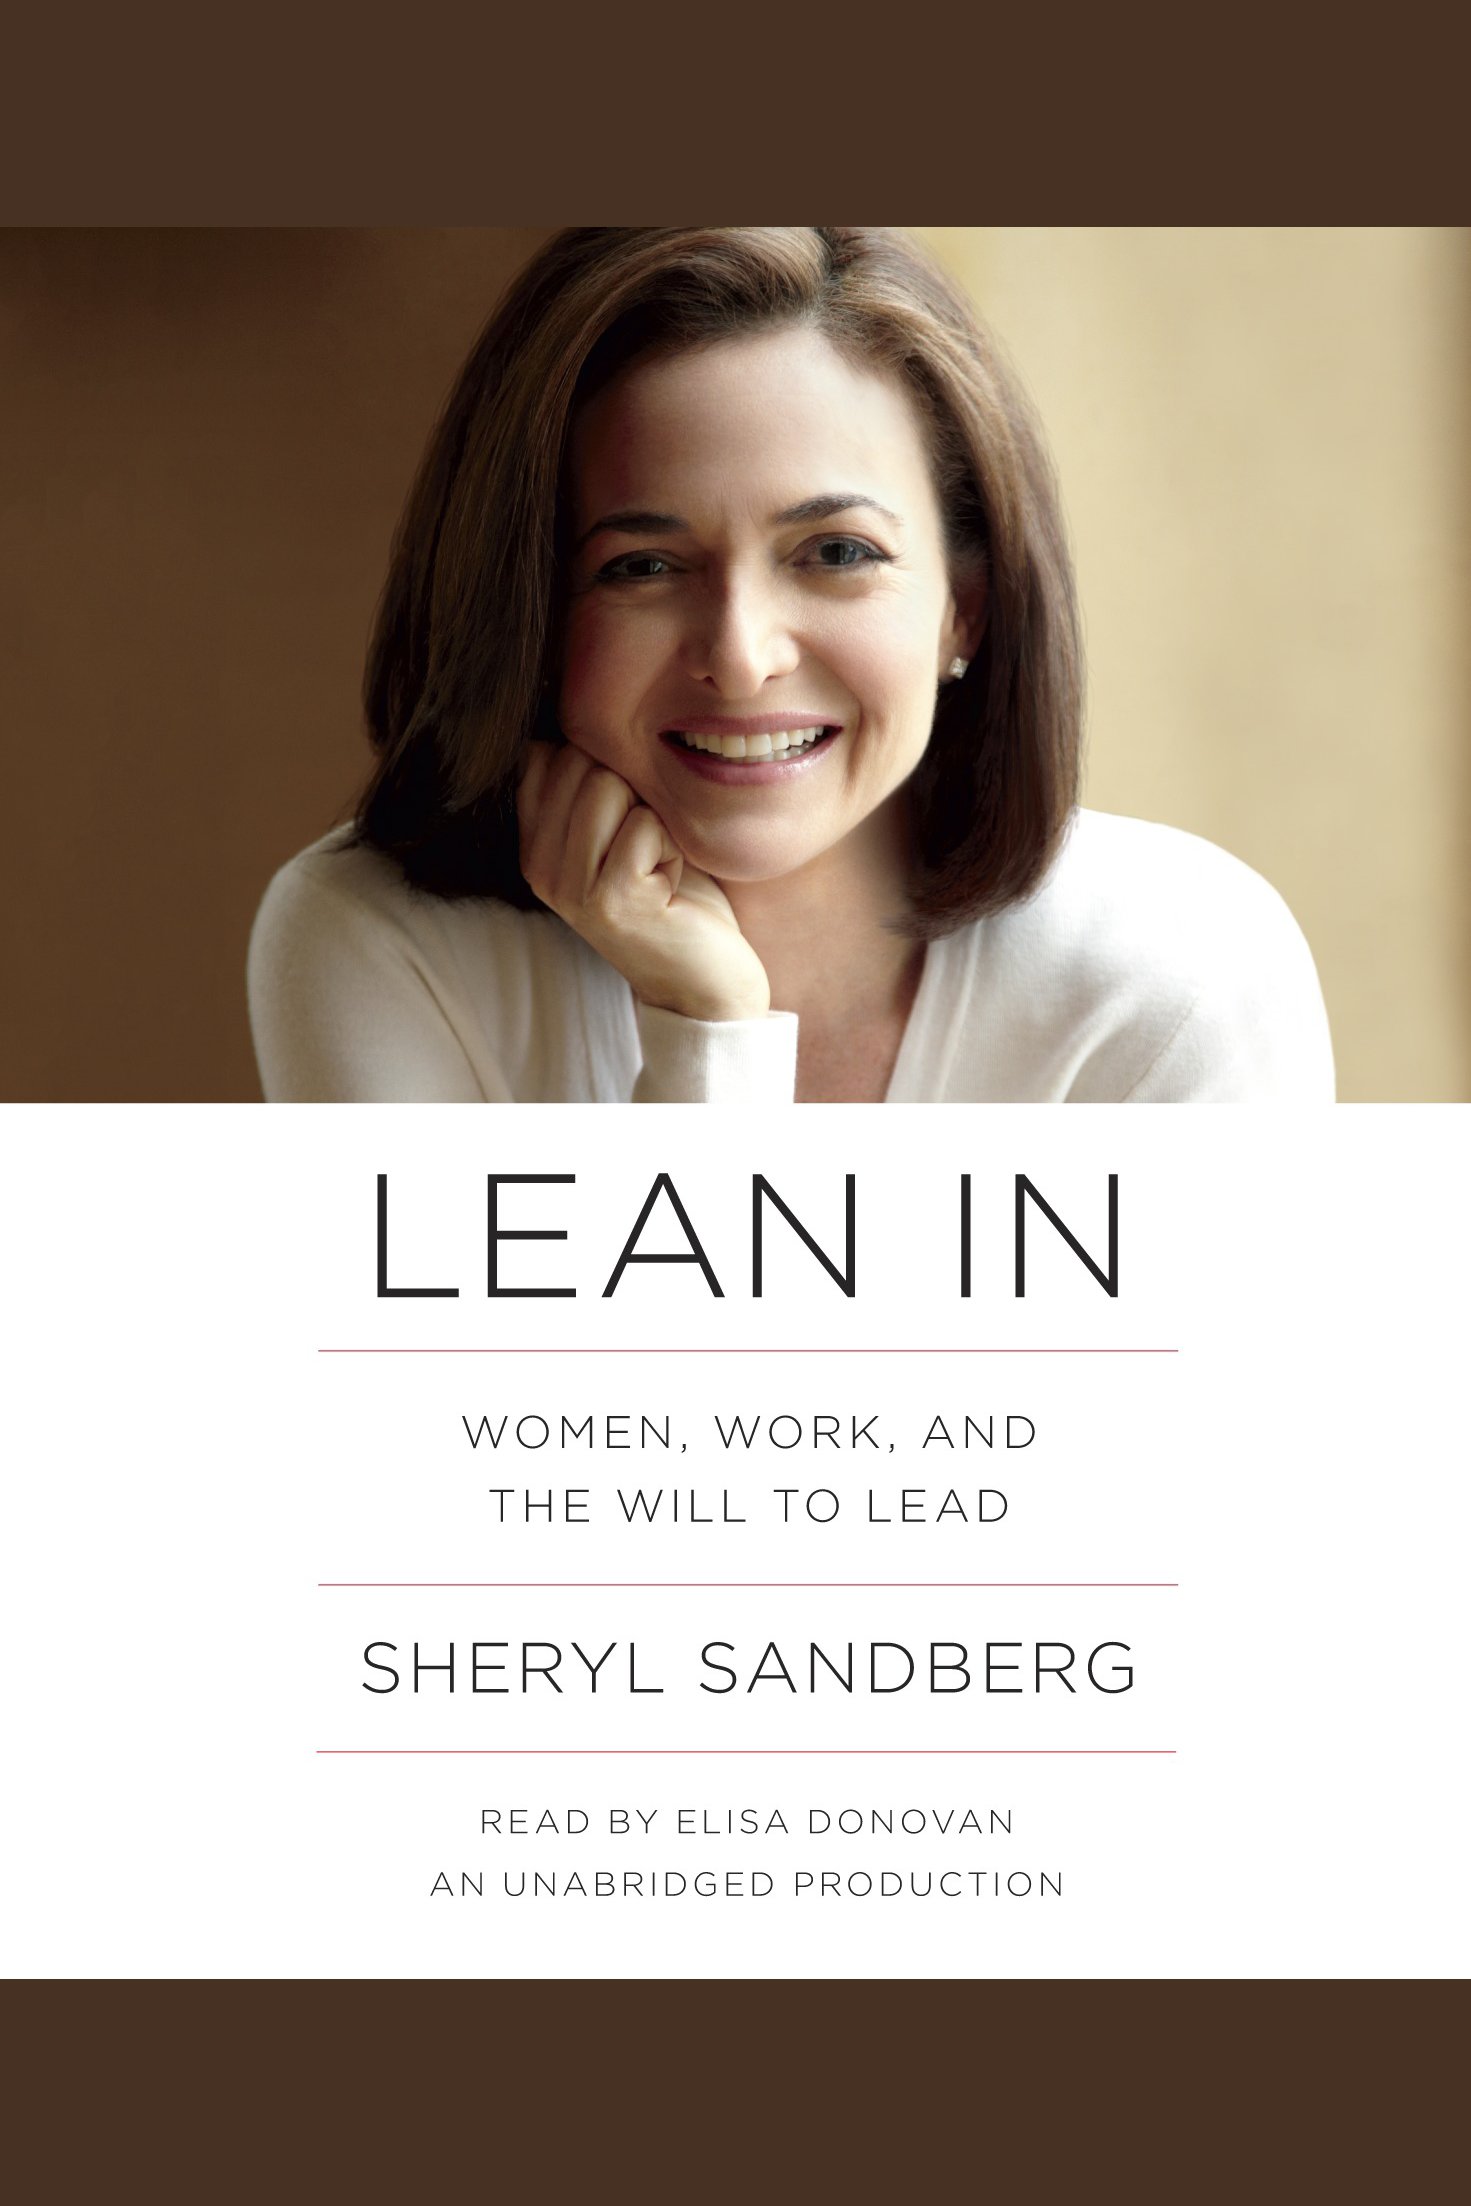 Lean in women, work, and the will to lead cover image